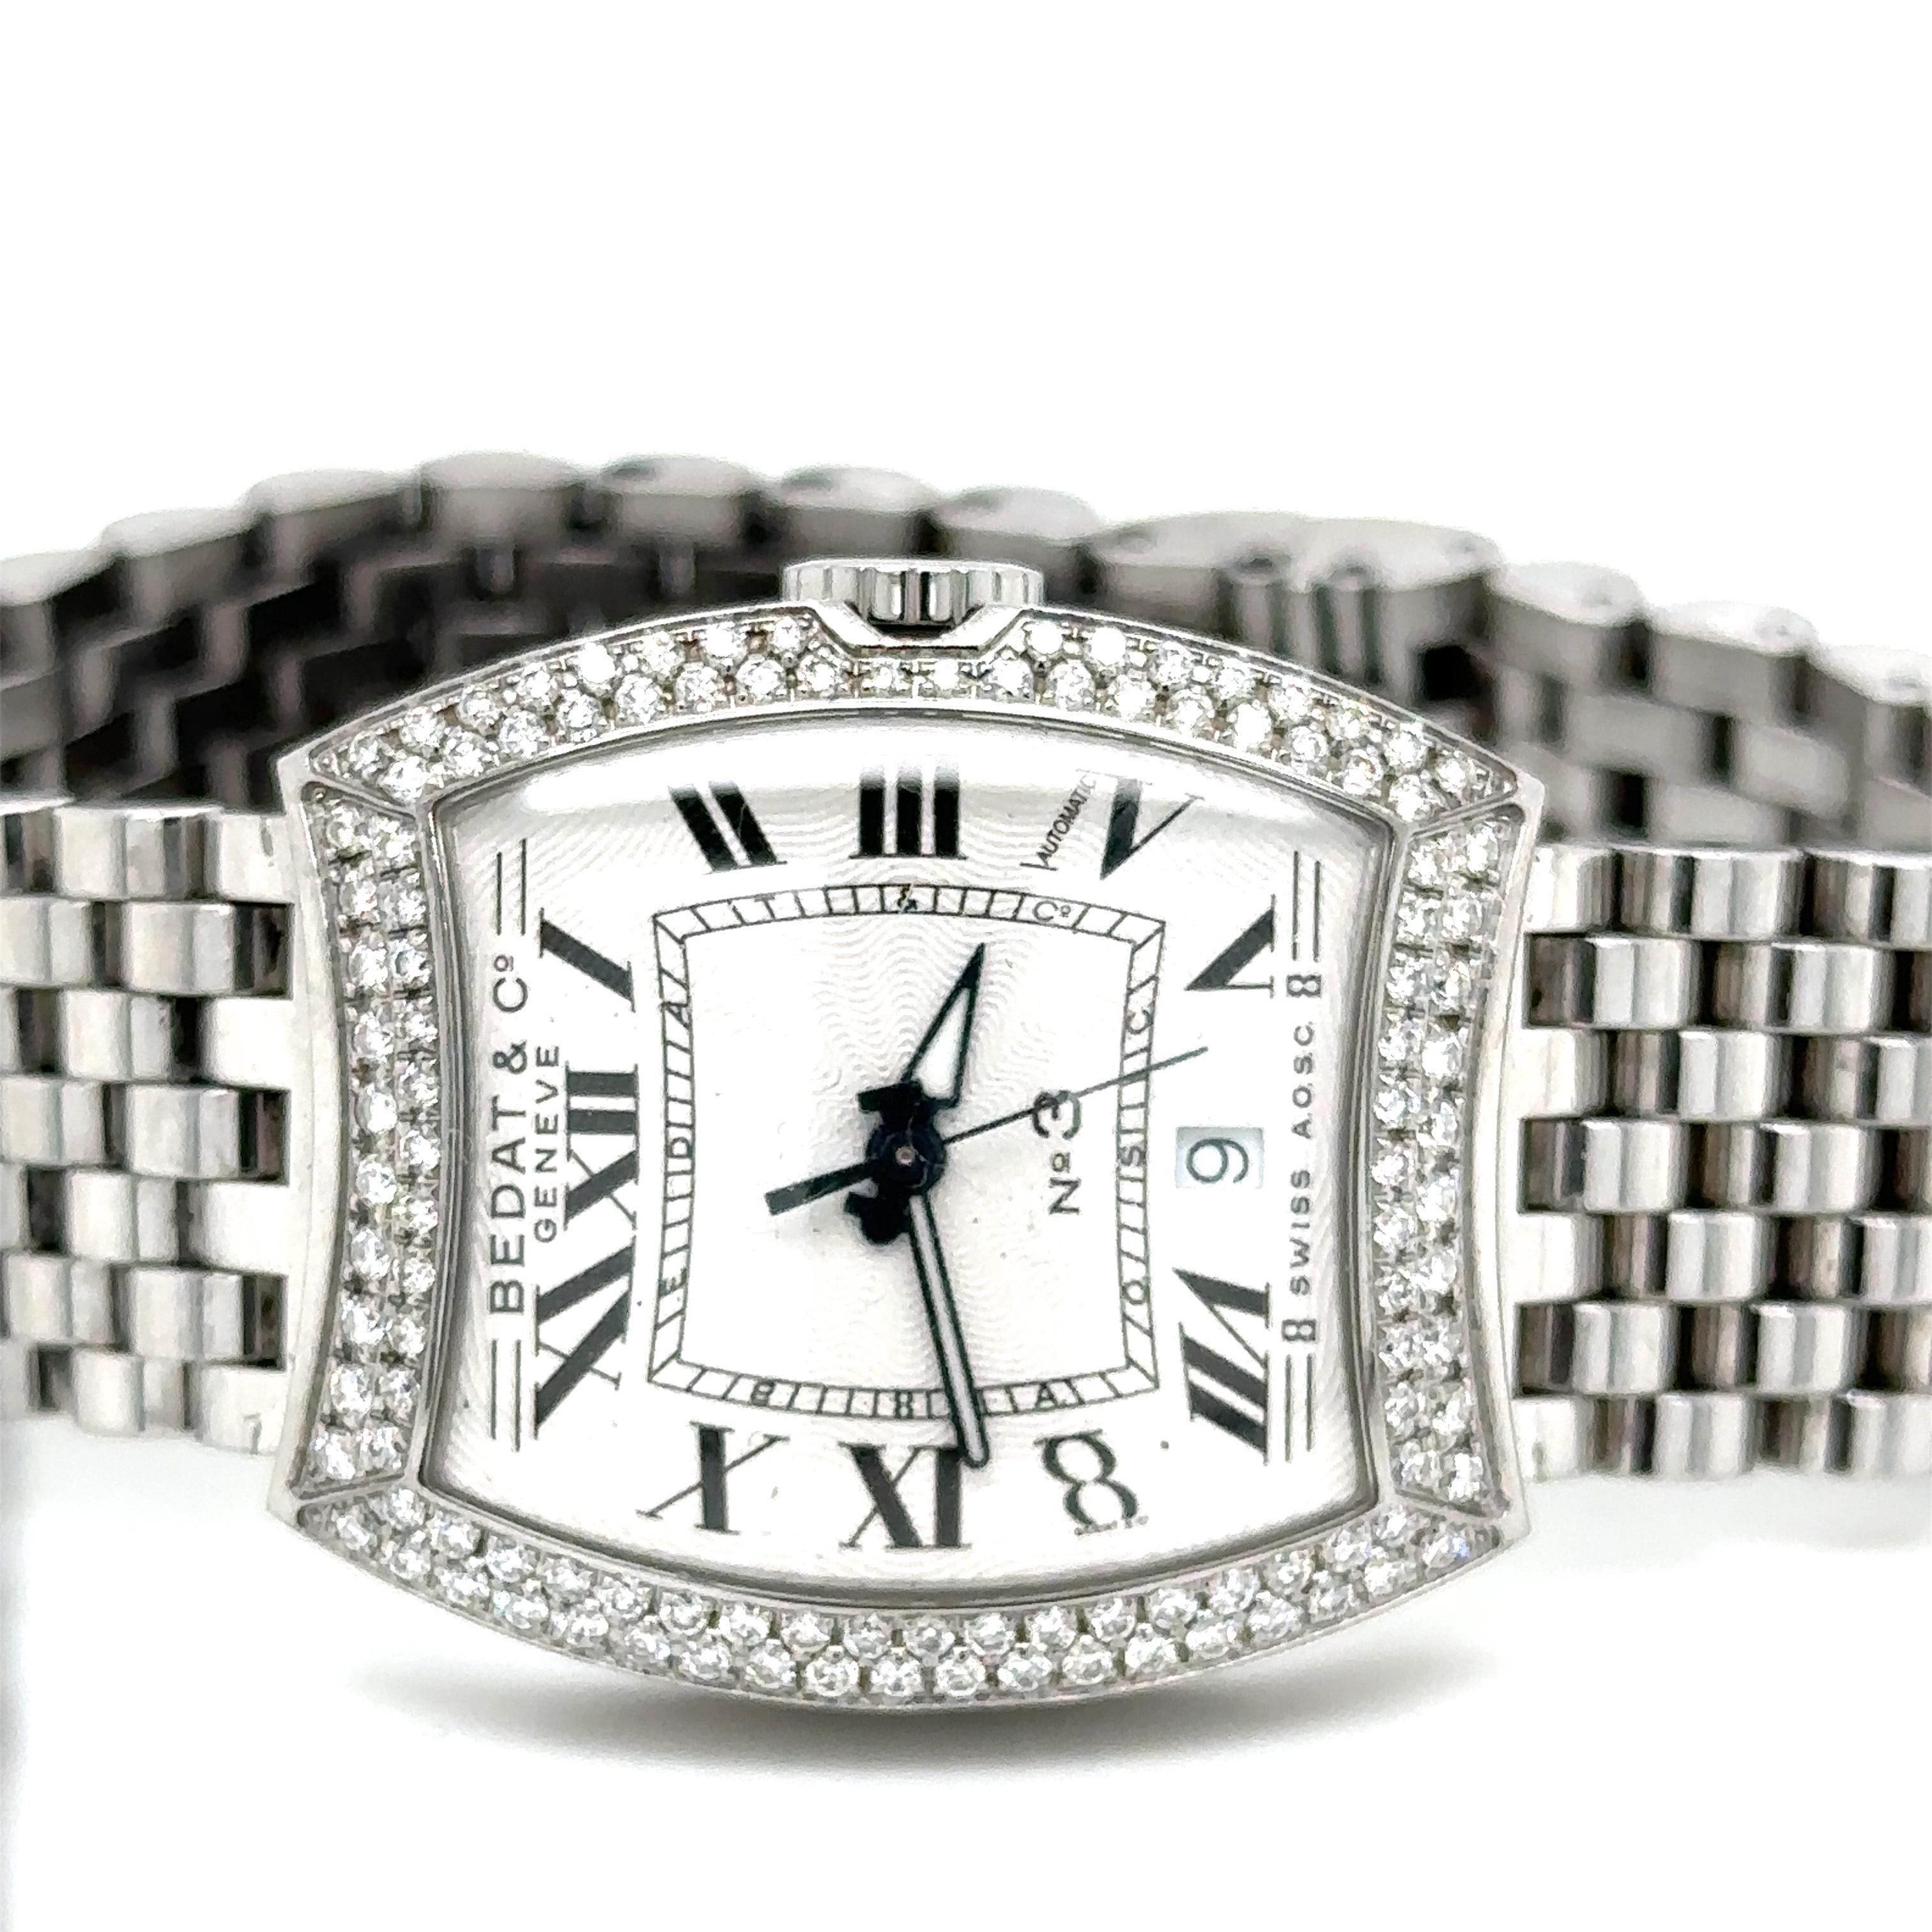 Bedat & Co. Ref. 314 No. 3 Ladies Automatic Diamond Bezel Watch Stainless Steel
Brand Name: Bedat & Co
Style Number:10576
Also Called: Ref. 314
Series: No. 3
Style (Gender): Ladies
Case Material: Stainless Steel with diamonds
Dial Color: White with